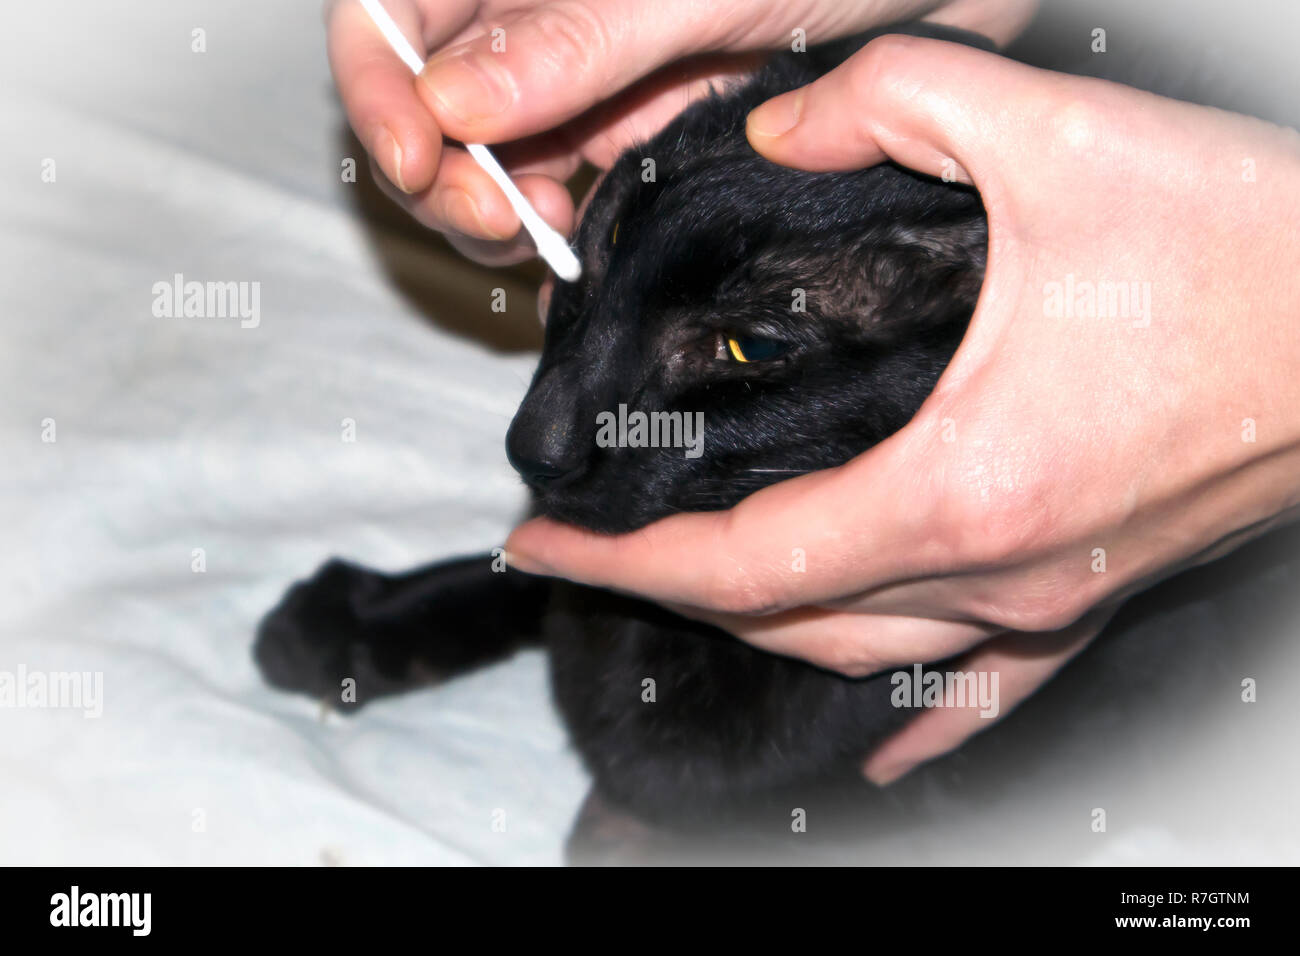 Veterinary doctor checking up the eyes of black oriental cat, hands with cotton swab closeup Stock Photo